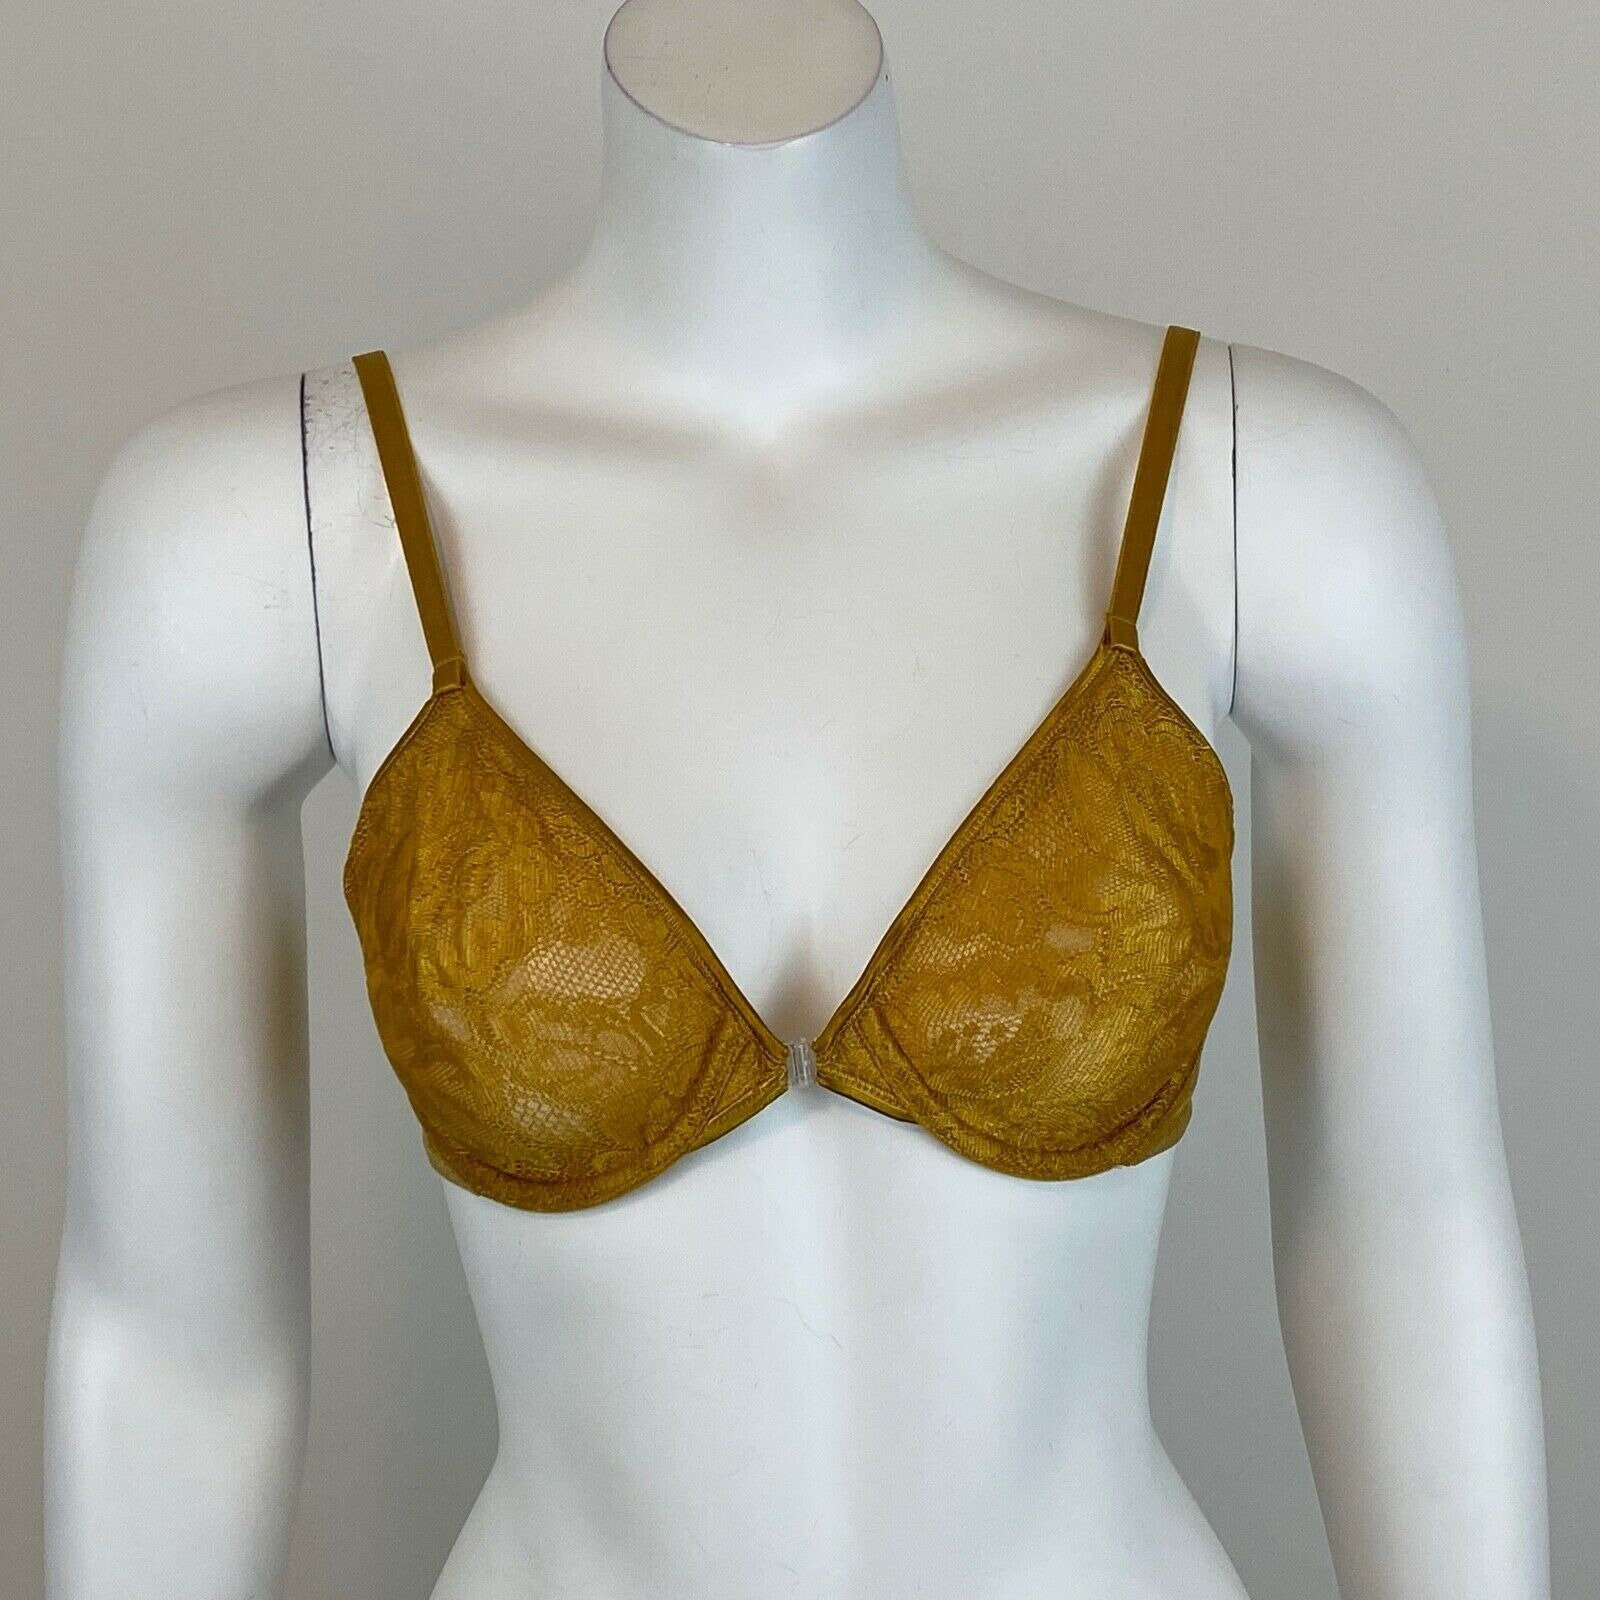 Warners Naked Lace Bra Size 34B, Sheer Unlined Underwire, Style 2526 -   Singapore